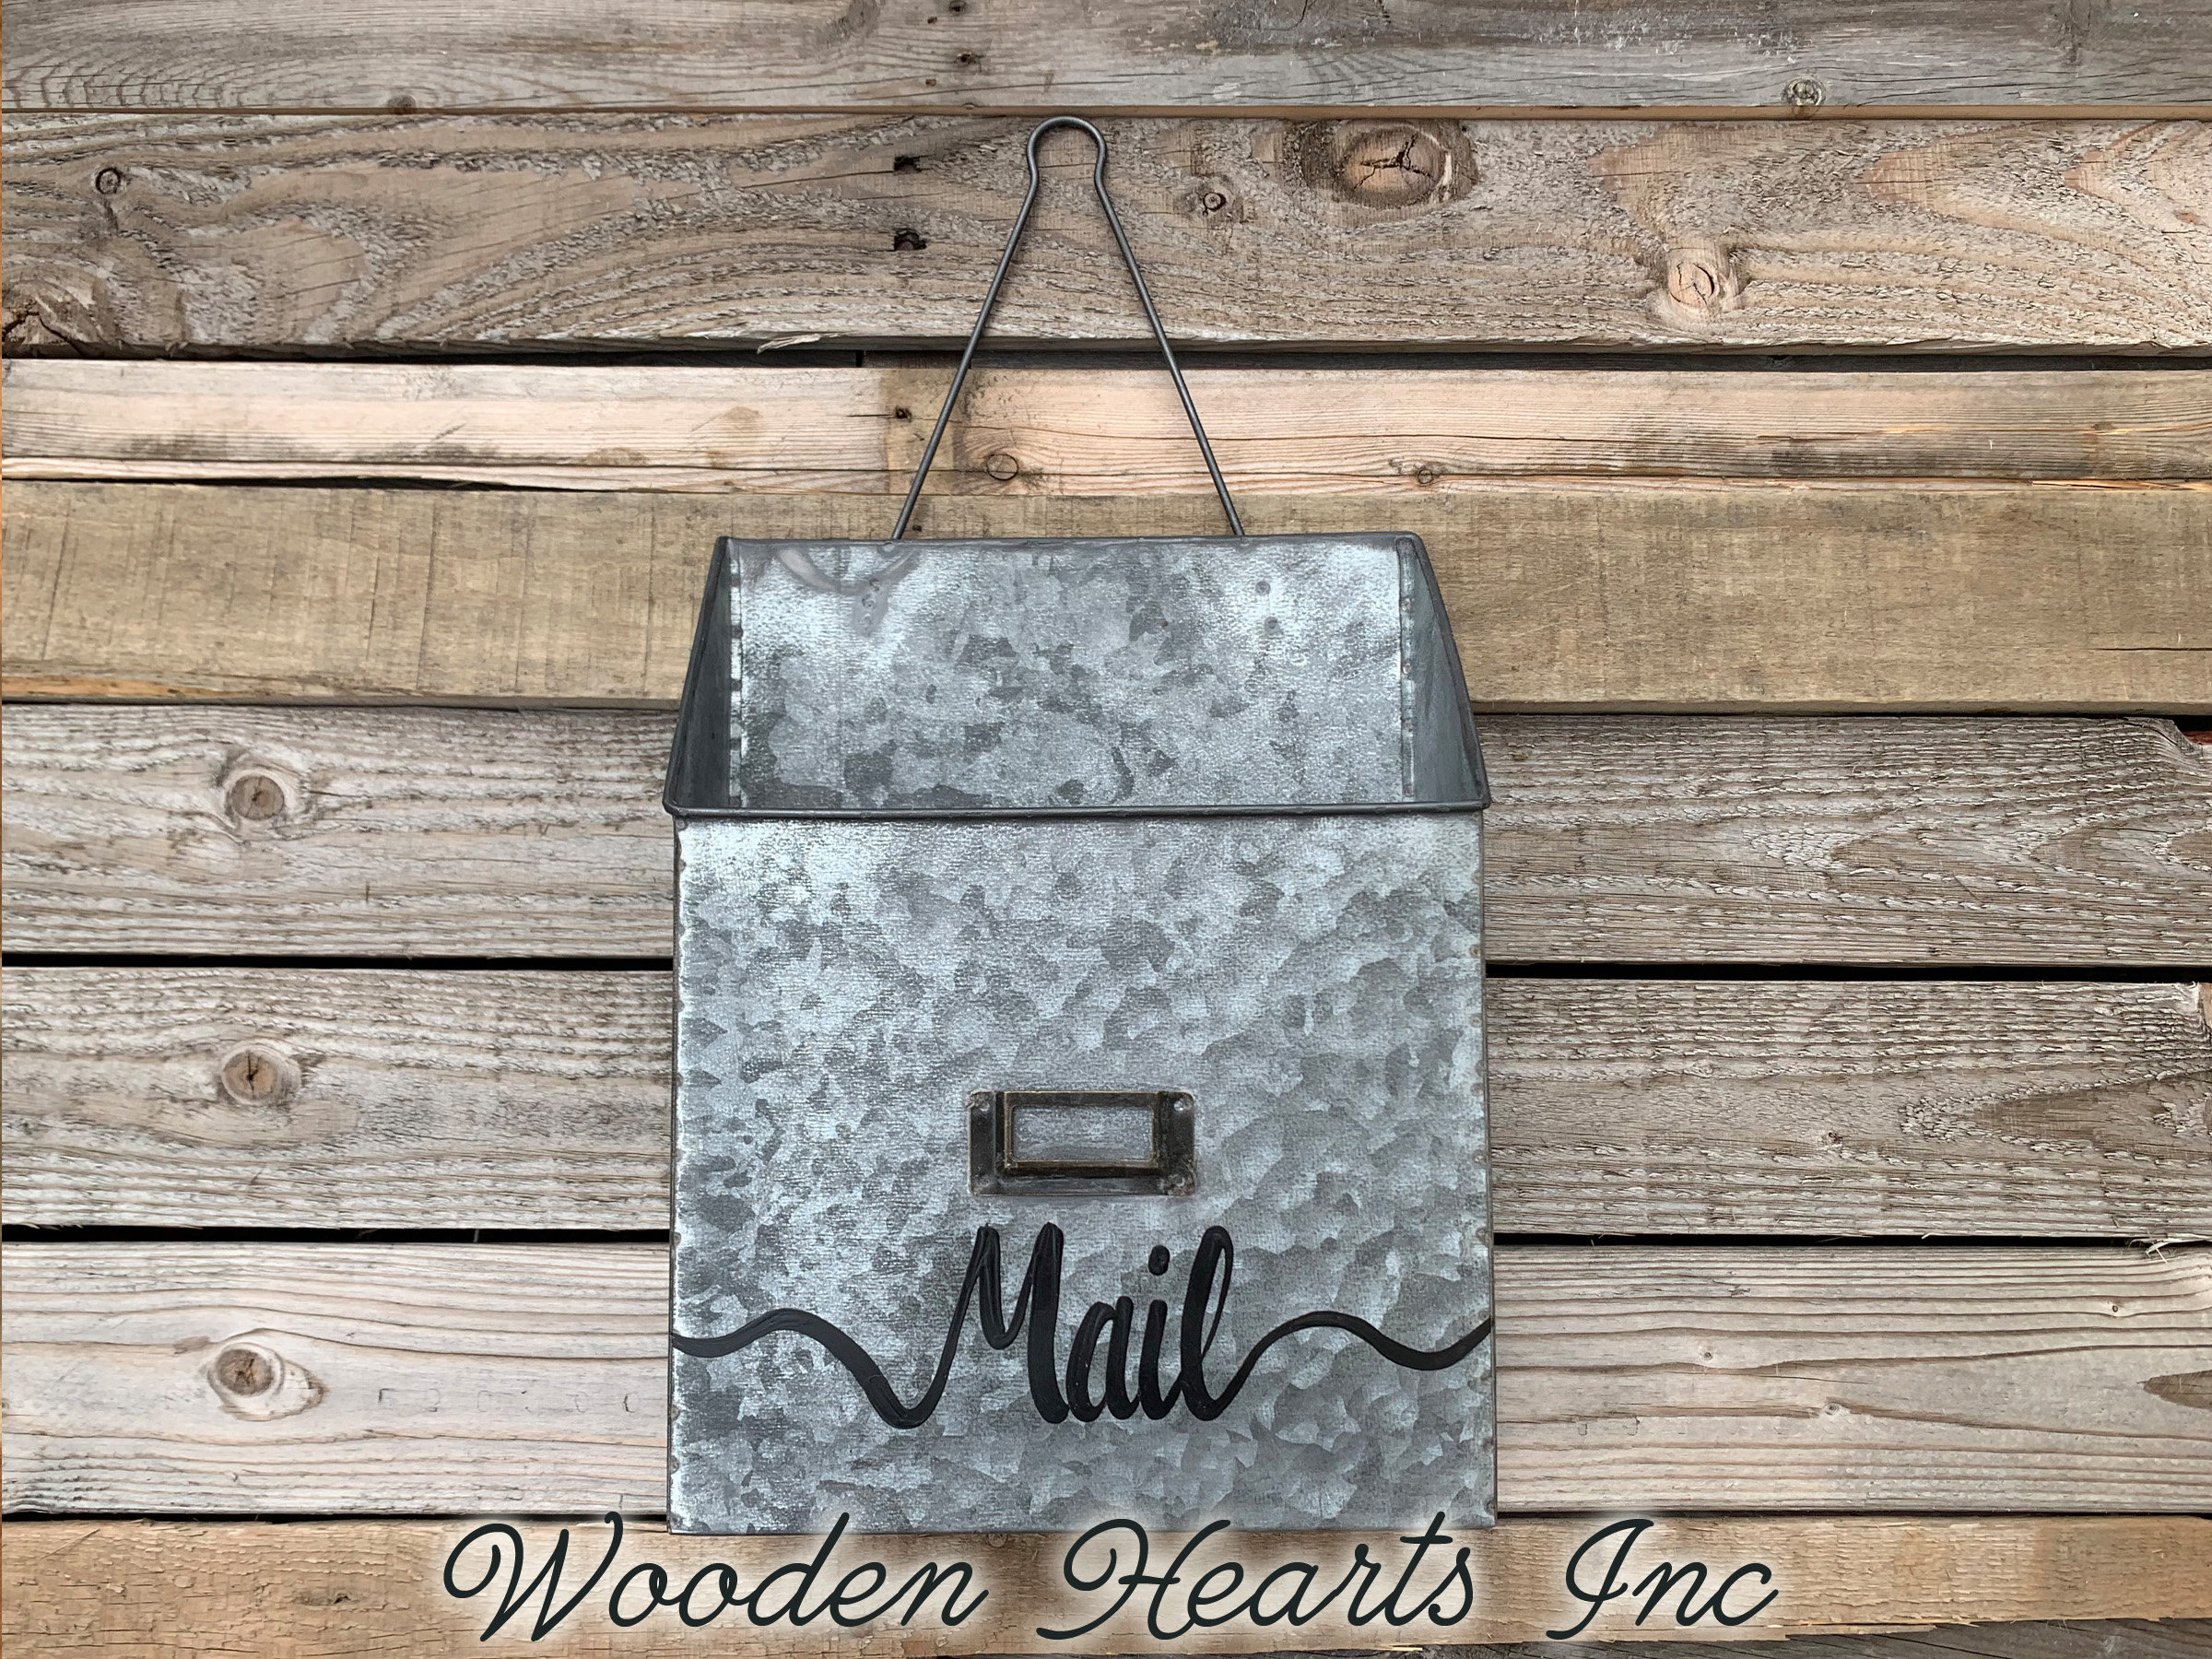 Rustic Red Metal Barn Decorative Letter Mail Box Wall Farmhouse Home Decor 14.5" 